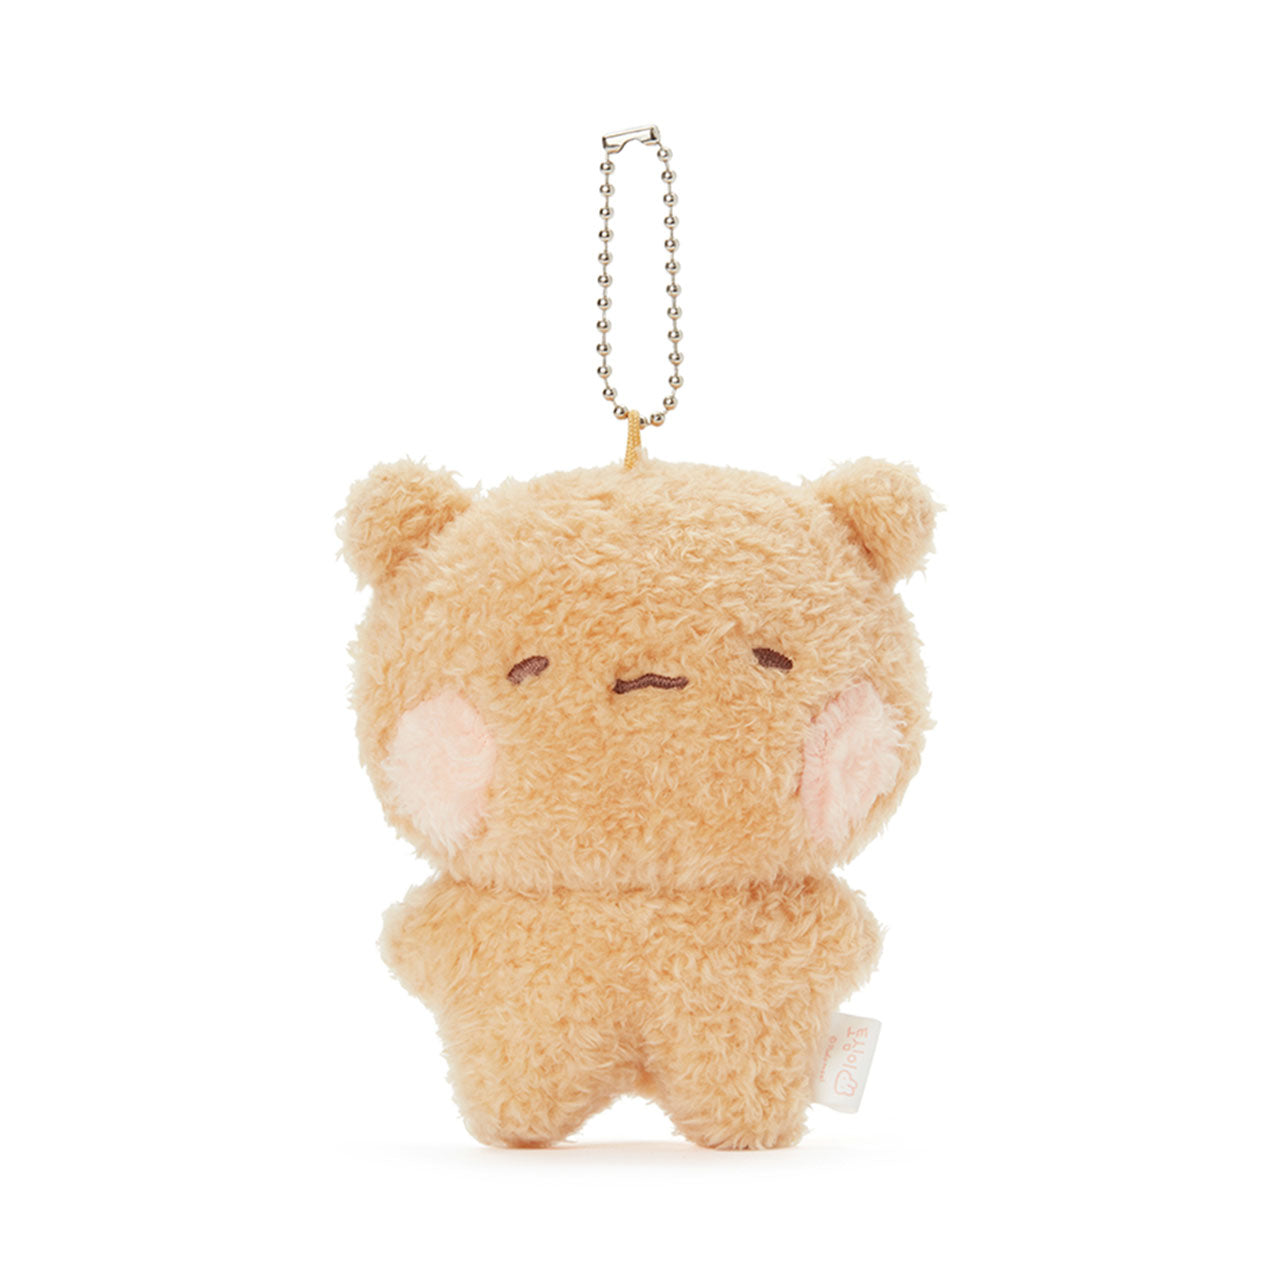 [KAKAO FRIENDS] TOSHIMEE & TOMUNGEE Plush Doll 10cm OFFICIAL MD